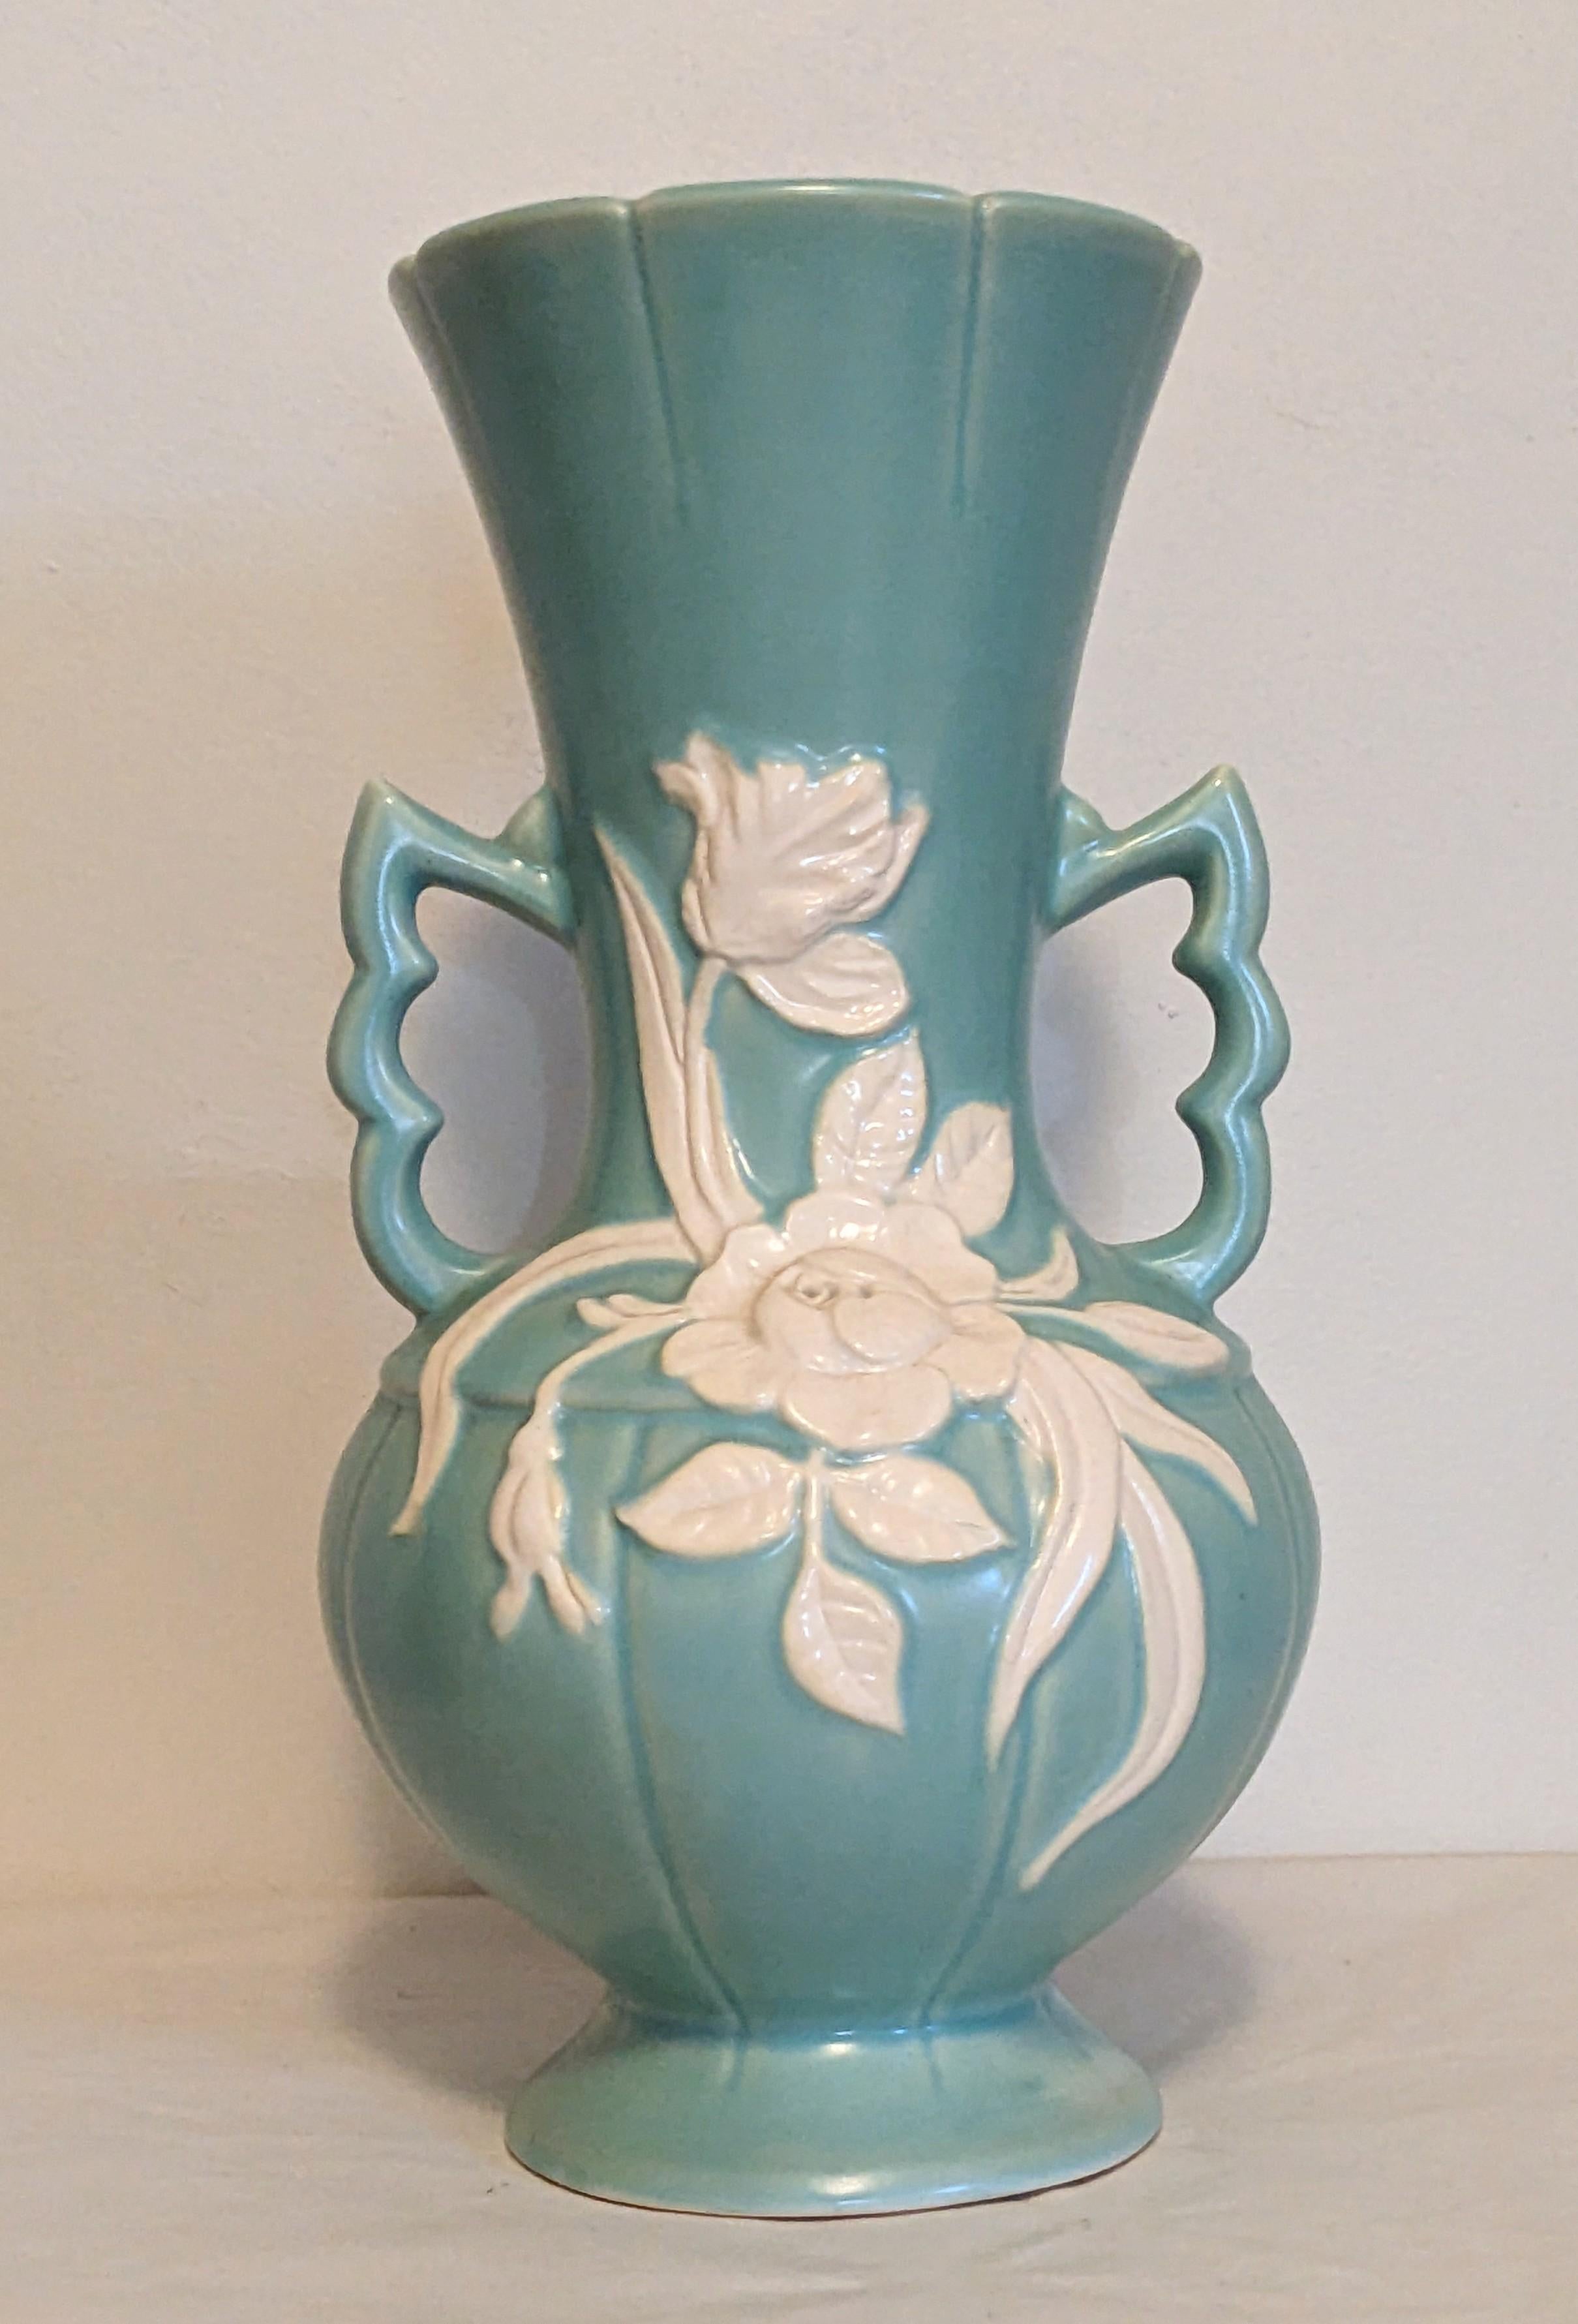 Attractive Art Deco Weller pottery vase in pale turquoise with ivory flower motifs.
1940's USA. Measures: 13